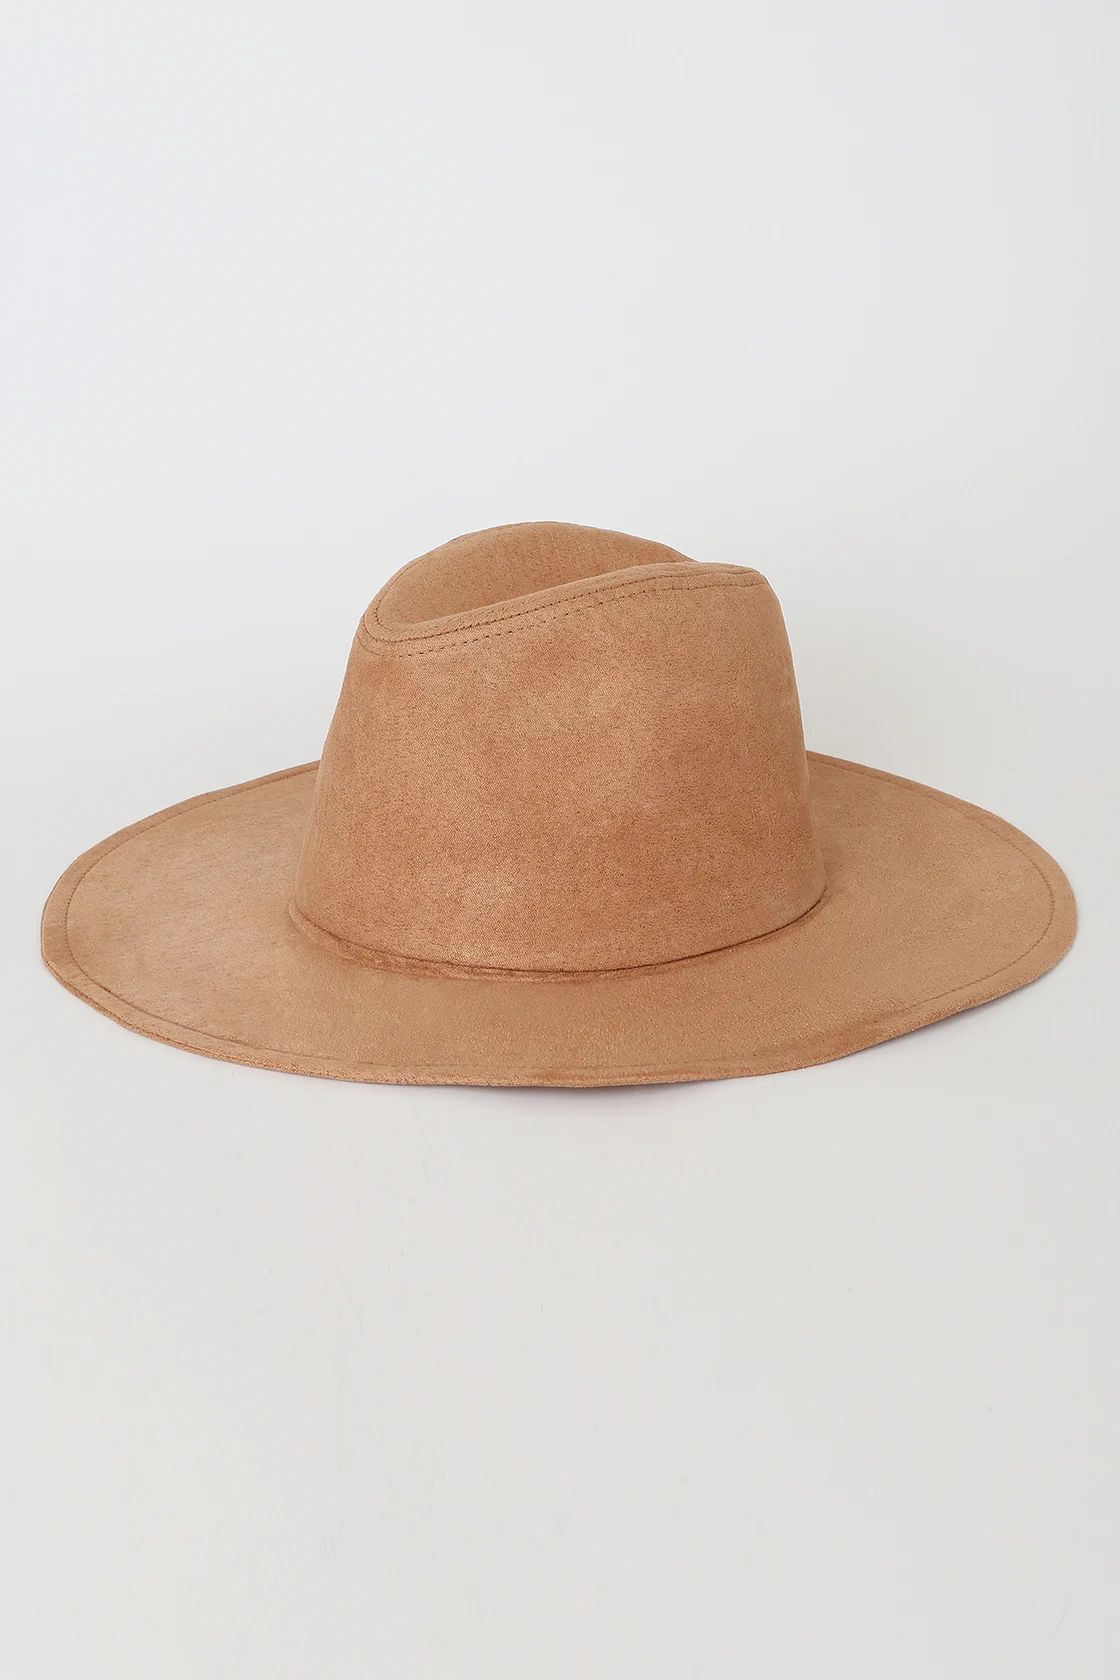 Heading Out West Camel Suede Fedora Hat | Lulus